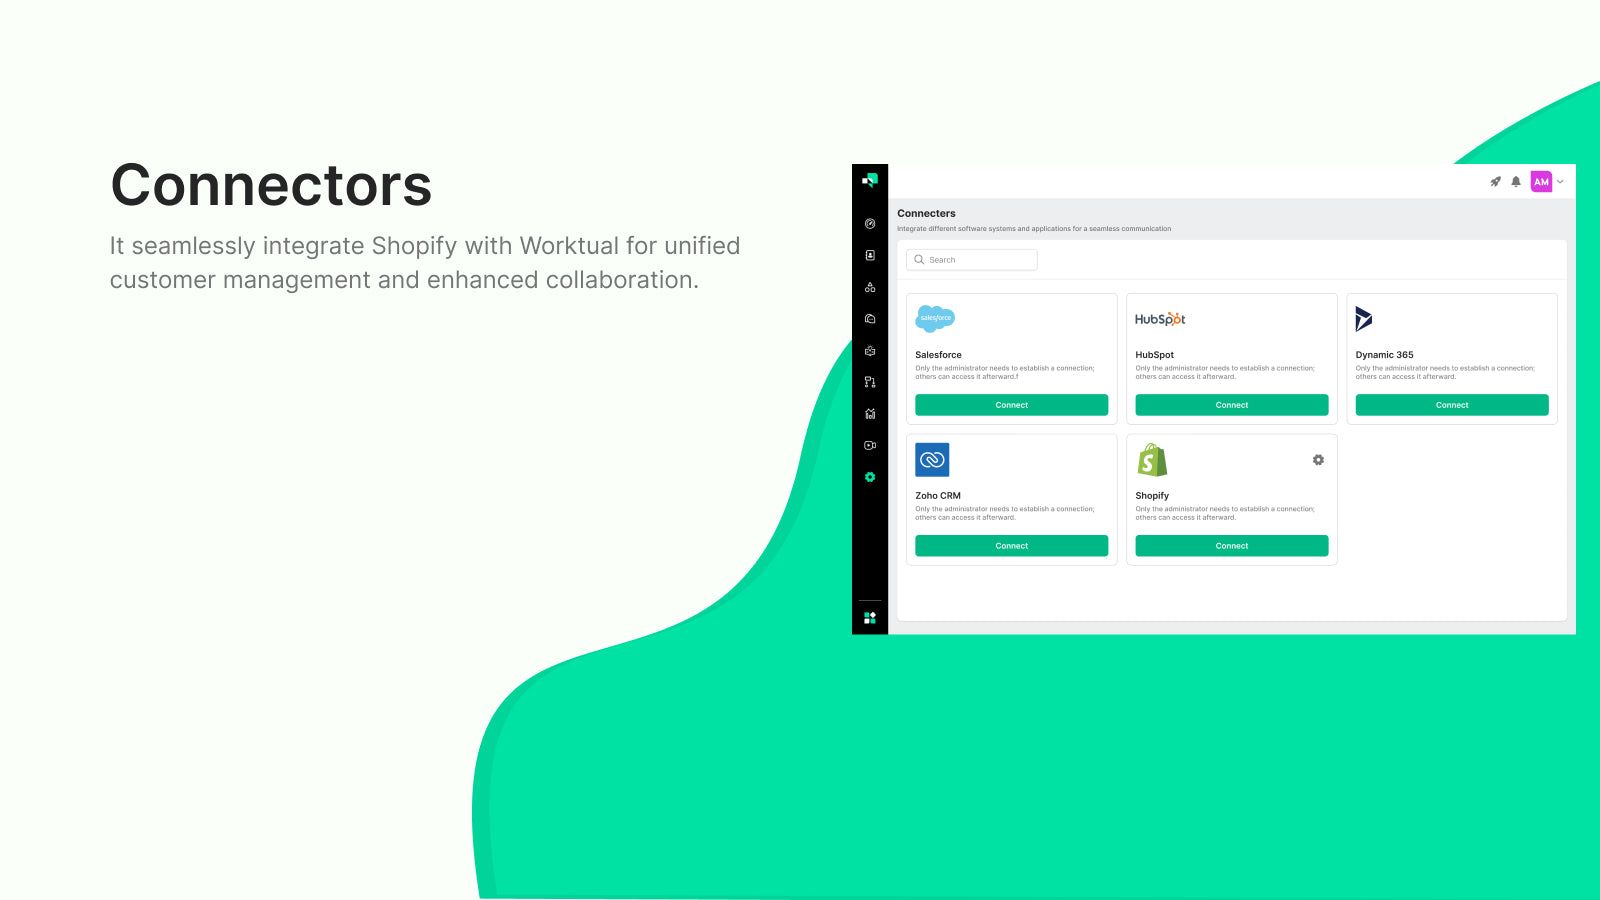 It seamlessly integrate Shopify with Worktual for Contact Sync